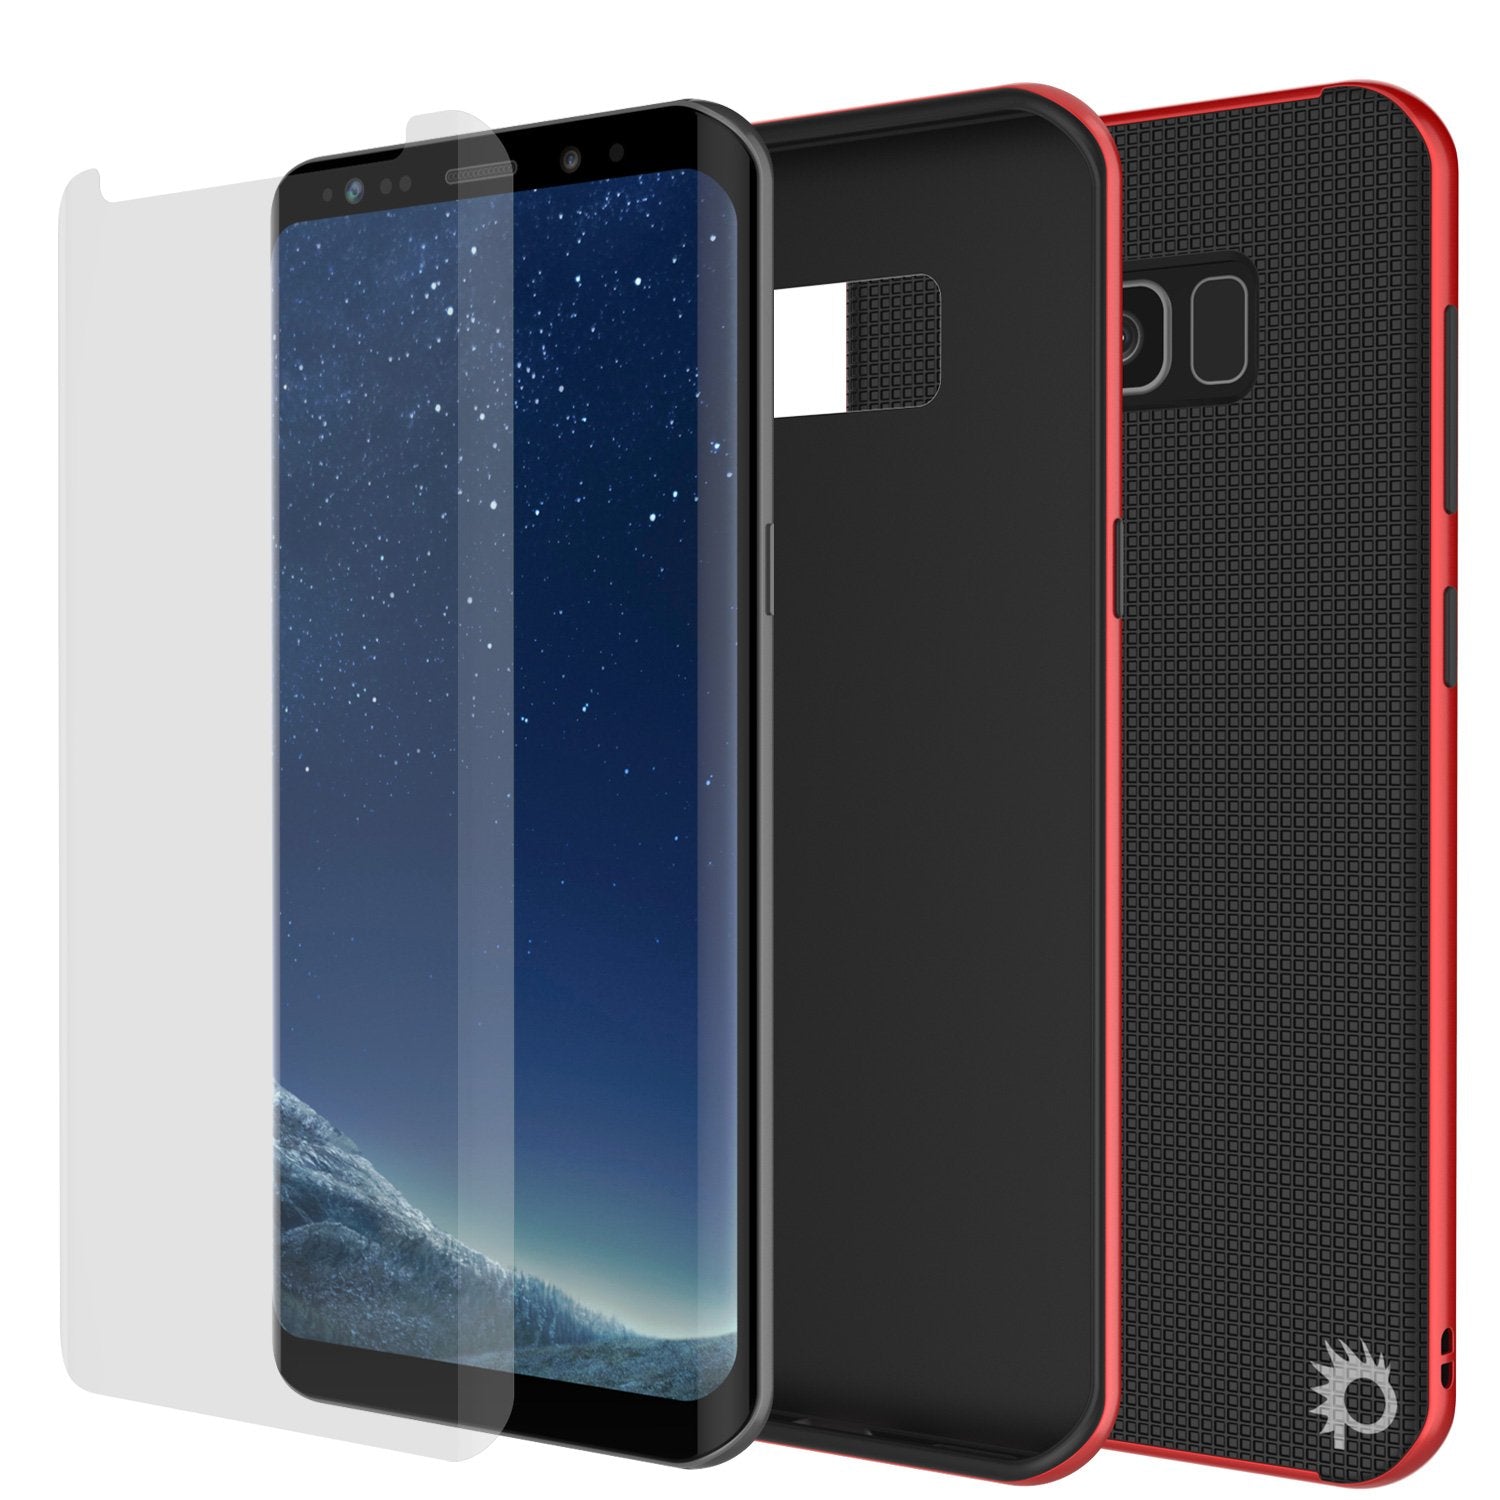 Galaxy S8 Case, PunkCase [Stealth Series] Hybrid 3-Piece Shockproof Dual Layer Cover [Non-Slip] [Soft TPU + PC Bumper] with PUNKSHIELD Screen Protector for Samsung S8 Edge [Red] - PunkCase NZ